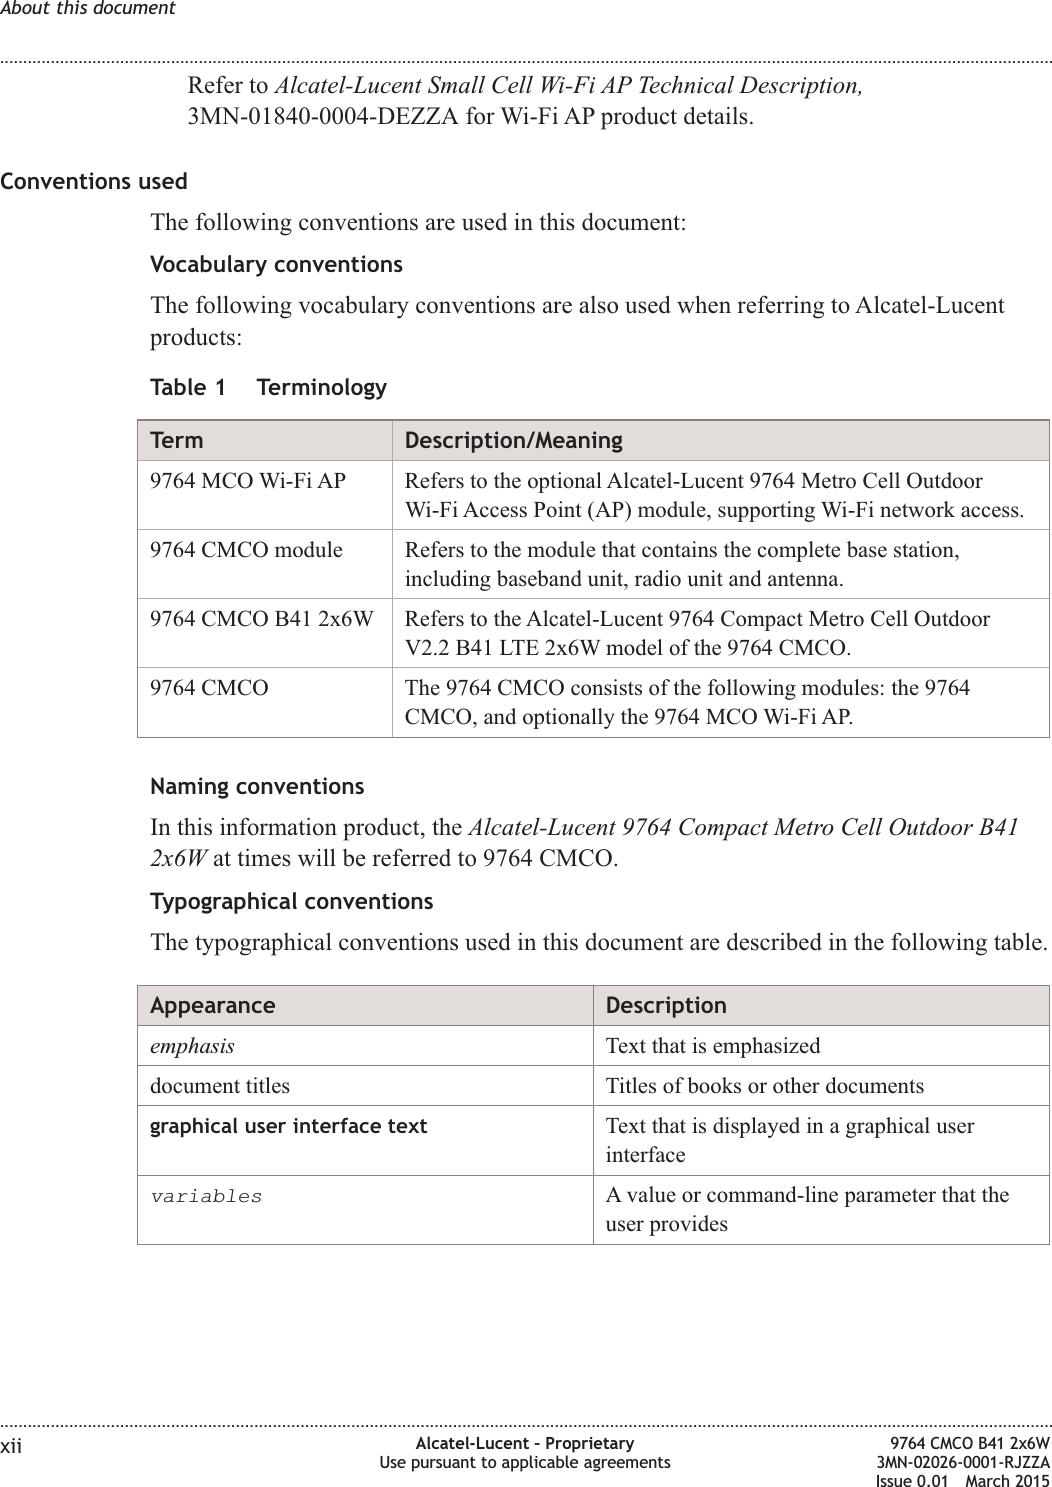 Refer to Alcatel-Lucent Small Cell Wi-Fi AP Technical Description,3MN-01840-0004-DEZZA for Wi-Fi AP product details.Conventions usedThe following conventions are used in this document:Vocabulary conventionsThe following vocabulary conventions are also used when referring to Alcatel-Lucentproducts:Table 1 TerminologyTerm Description/Meaning9764 MCO Wi-Fi AP Refers to the optional Alcatel-Lucent 9764 Metro Cell OutdoorWi-Fi Access Point (AP) module, supporting Wi-Fi network access.9764 CMCO module Refers to the module that contains the complete base station,including baseband unit, radio unit and antenna.9764 CMCO B41 2x6W Refers to the Alcatel-Lucent 9764 Compact Metro Cell OutdoorV2.2 B41 LTE 2x6W model of the 9764 CMCO.9764 CMCO The 9764 CMCO consists of the following modules: the 9764CMCO, and optionally the 9764 MCO Wi-Fi AP.Naming conventionsIn this information product, the Alcatel-Lucent 9764 Compact Metro Cell Outdoor B412x6W at times will be referred to 9764 CMCO.Typographical conventionsThe typographical conventions used in this document are described in the following table.Appearance Descriptionemphasis Text that is emphasizeddocument titles Titles of books or other documentsgraphical user interface text Text that is displayed in a graphical userinterfacevariablesA value or command-line parameter that theuser providesAbout this document........................................................................................................................................................................................................................................................................................................................................................................................................................................................................xii Alcatel-Lucent – ProprietaryUse pursuant to applicable agreements9764 CMCO B41 2x6W3MN-02026-0001-RJZZAIssue 0.01 March 2015DRAFTDRAFT